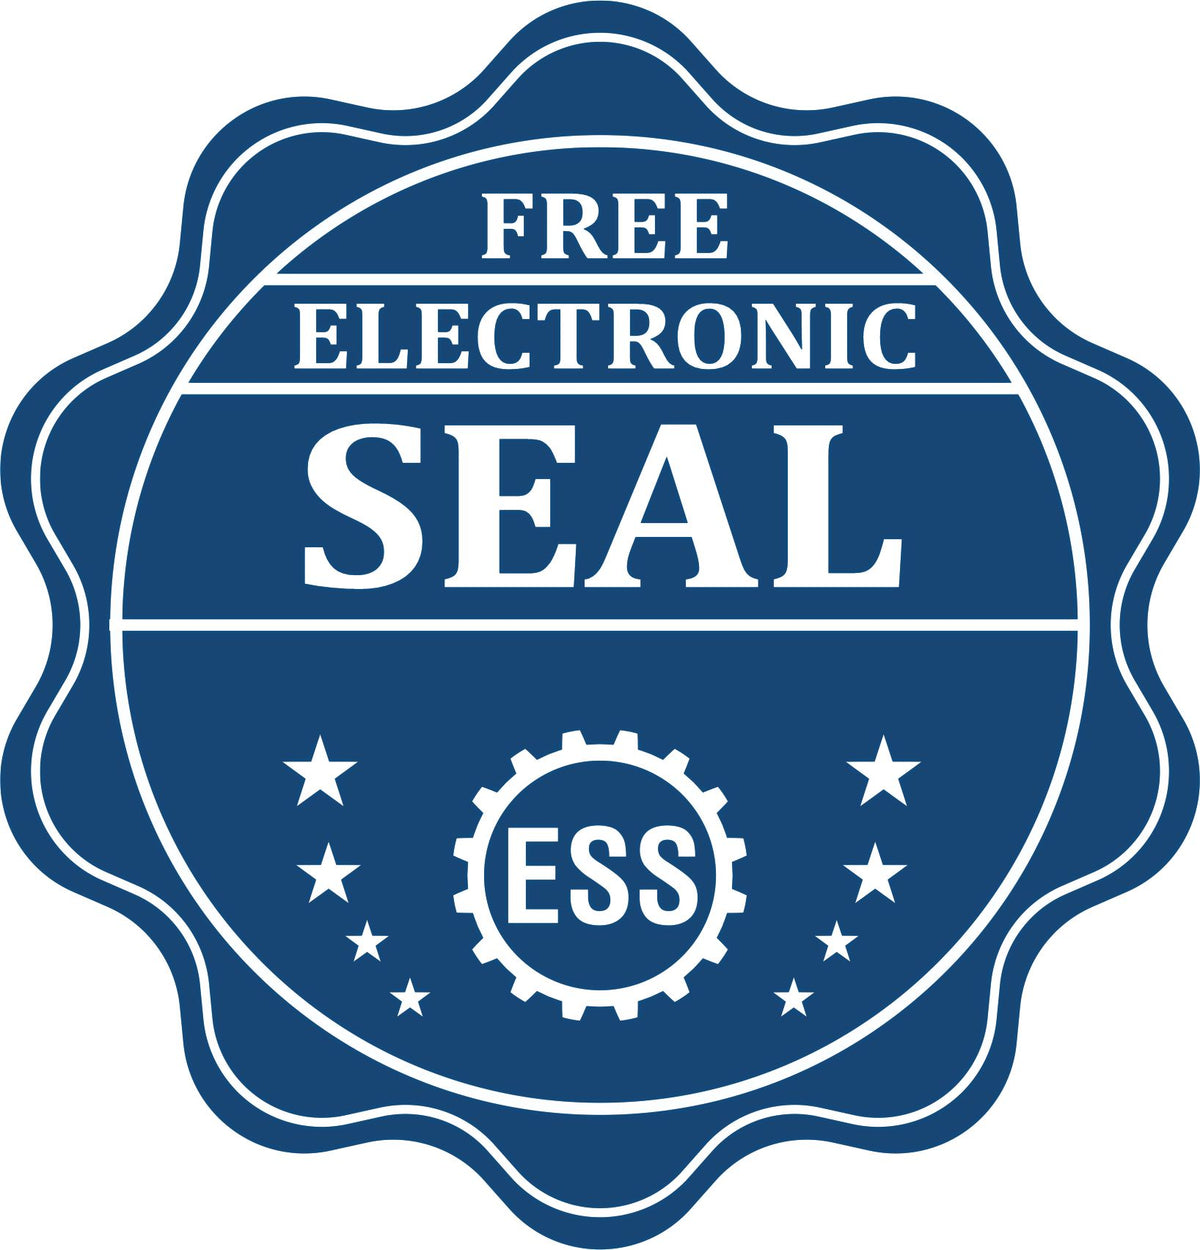 A badge showing a free electronic seal for the State of Georgia Soft Land Surveyor Embossing Seal with stars and the ESS gear on the emblem.